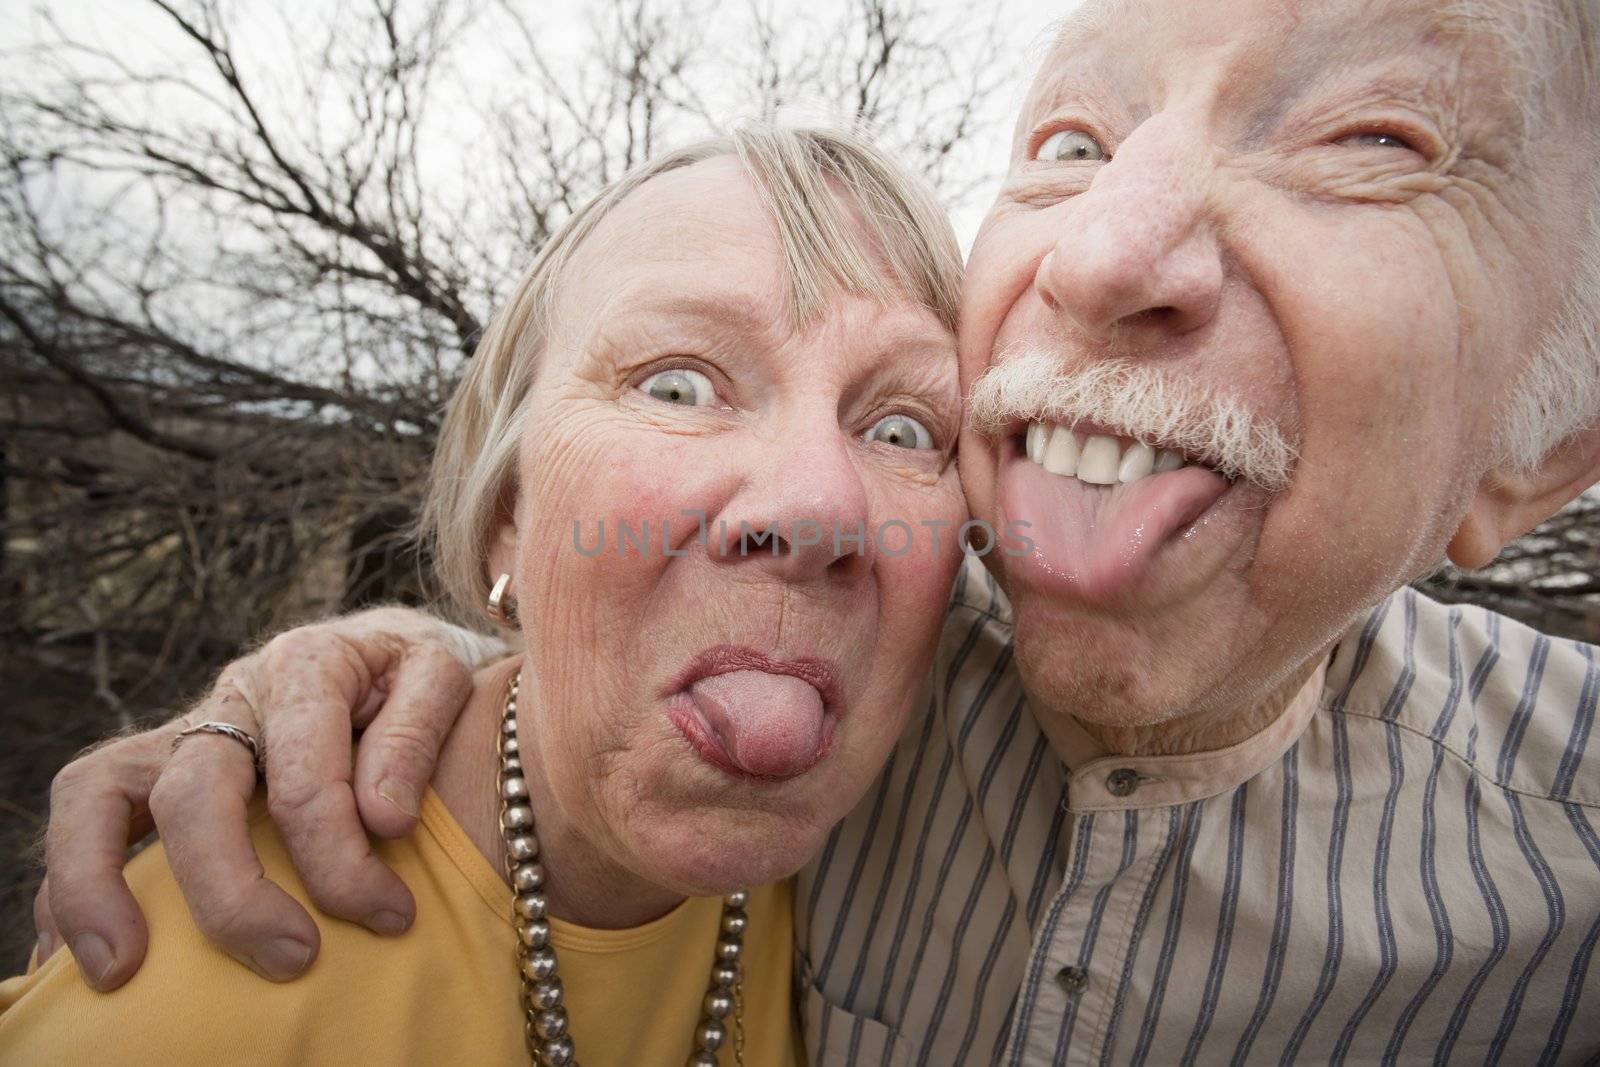 Crazy Couple Sticking Out Tongues by Creatista